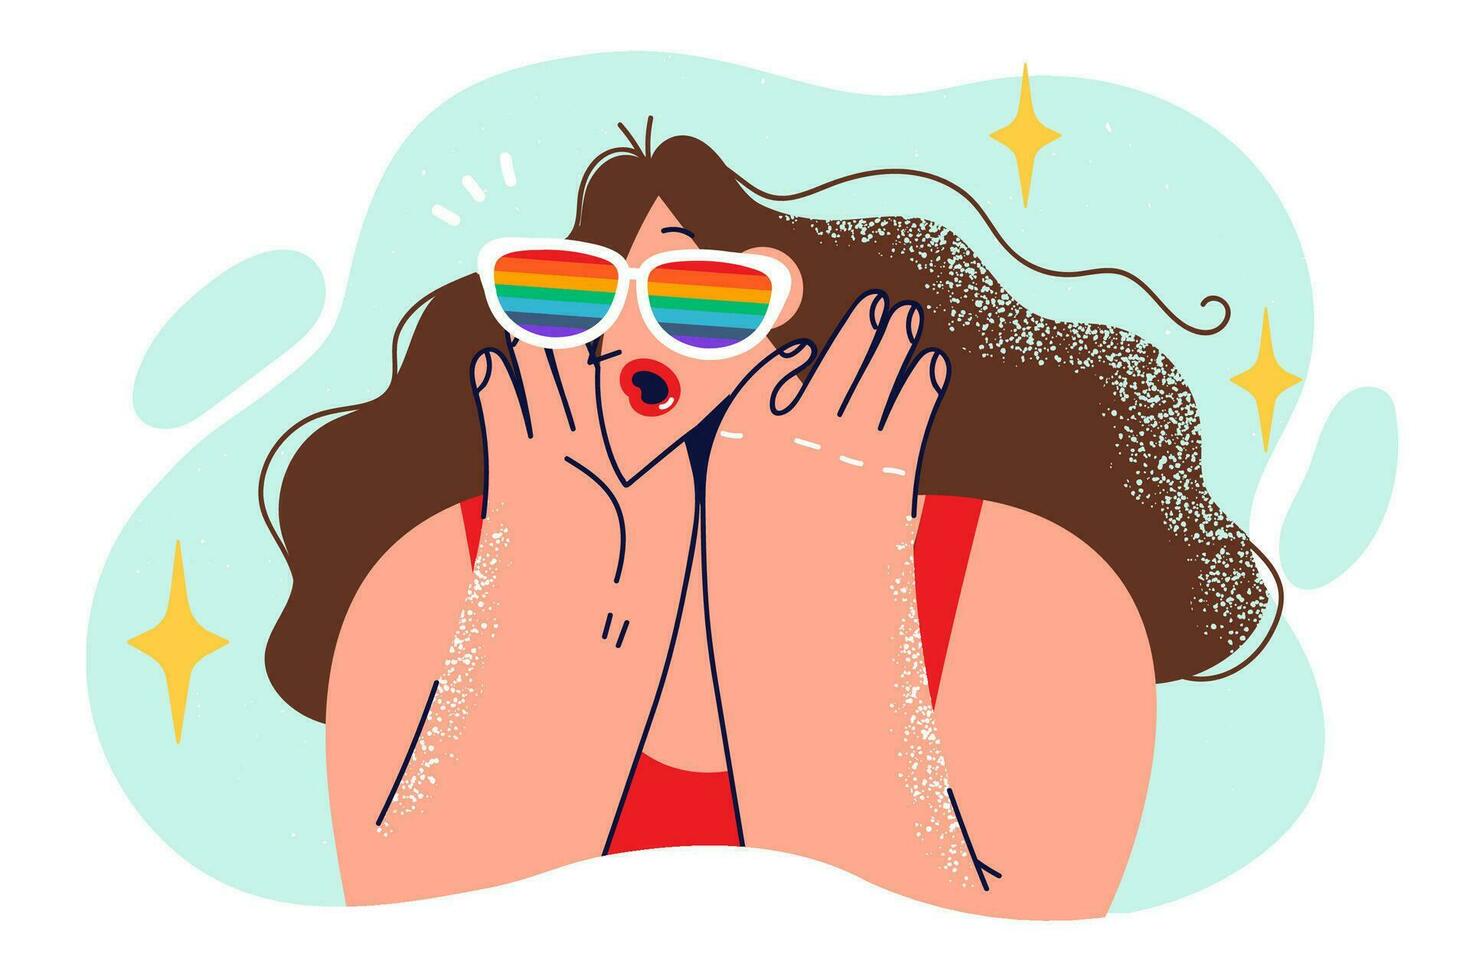 Amazing woman in glasses with rainbow stripes opens mouth and looks forward experiencing enthusiastic emotions. Concept rainbow glasses and desire to see only good in world around. vector